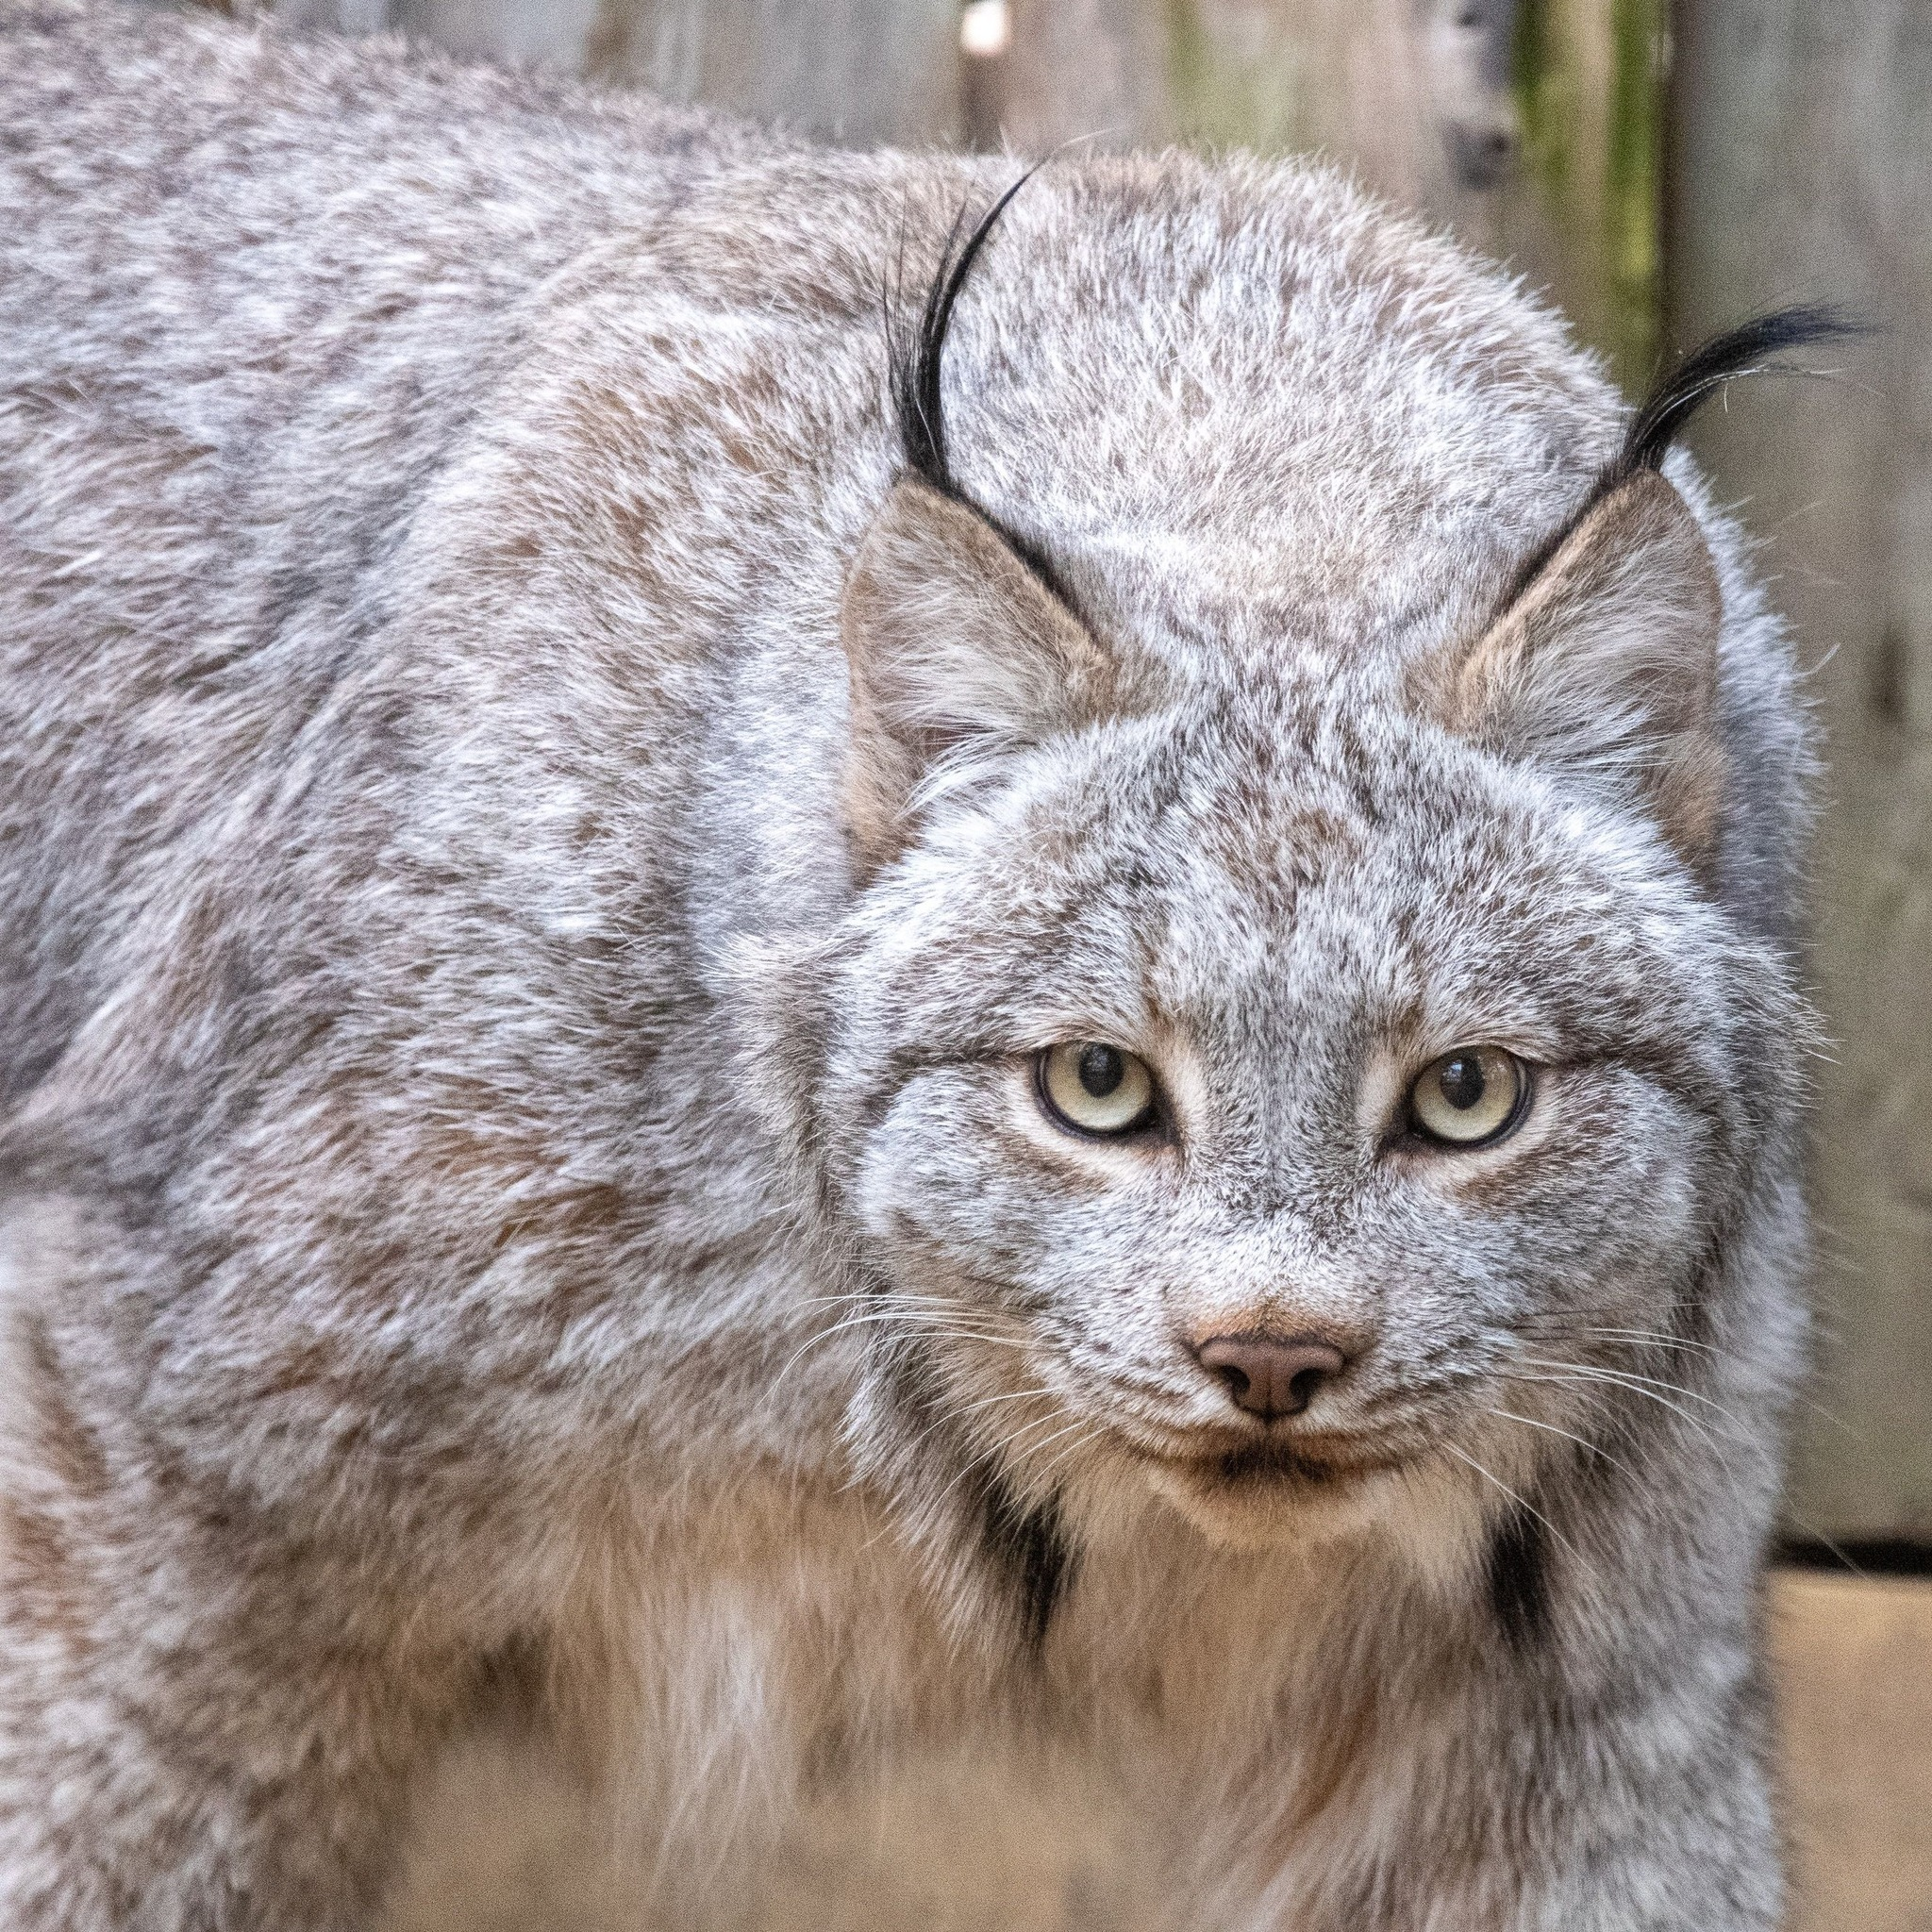 Potter Park Zoo in Lansing welcomes two new lynx